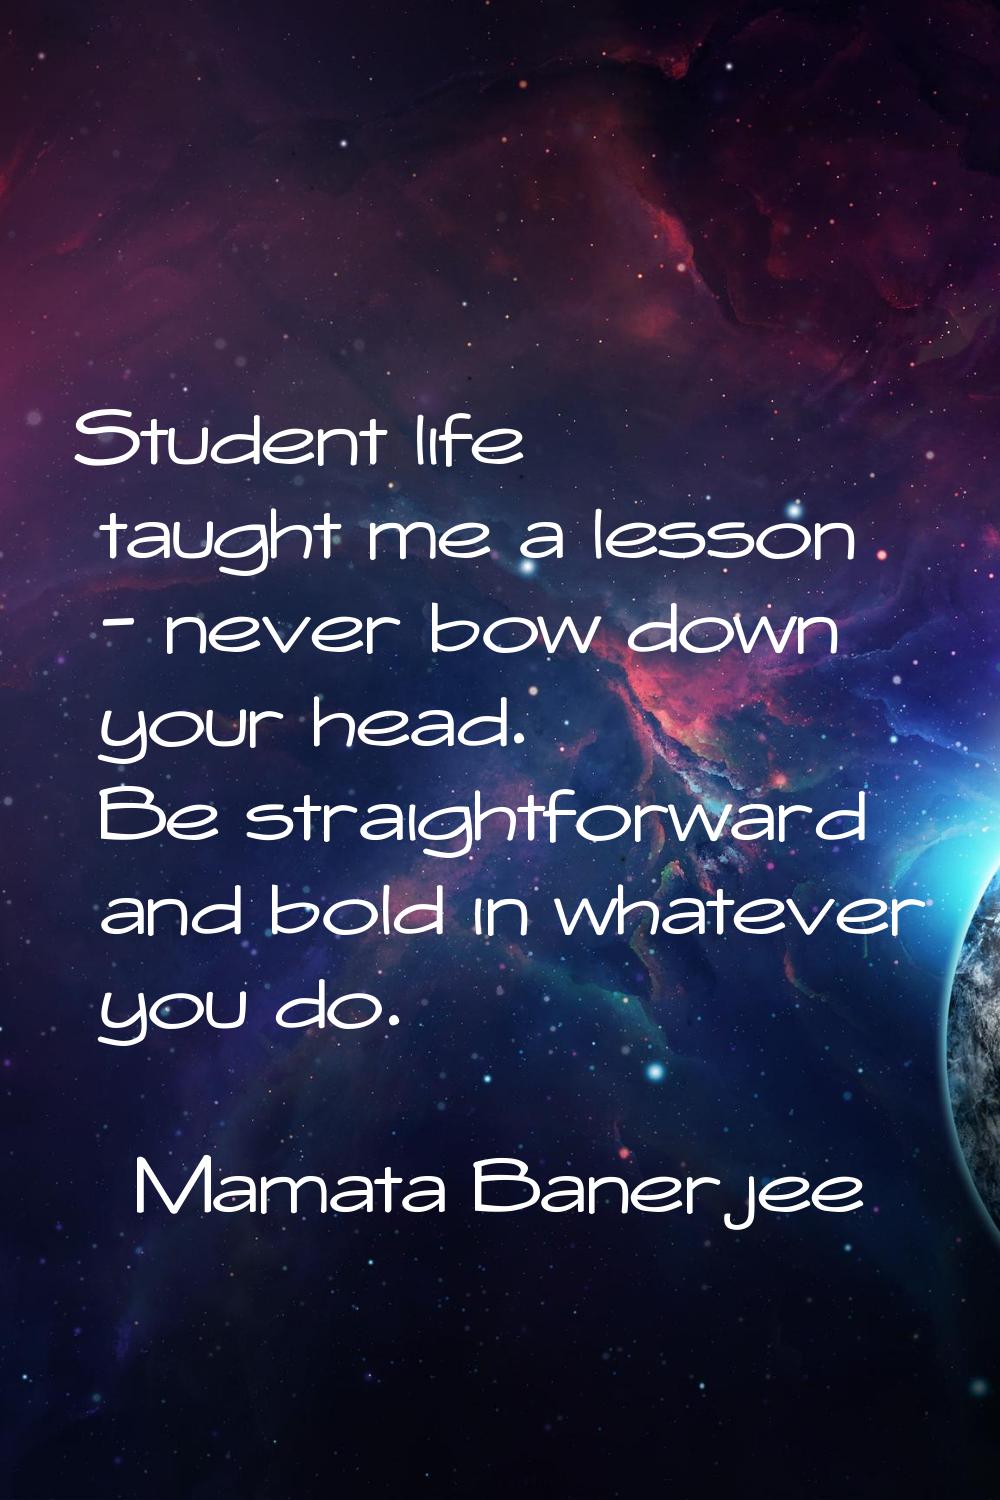 Student life taught me a lesson - never bow down your head. Be straightforward and bold in whatever